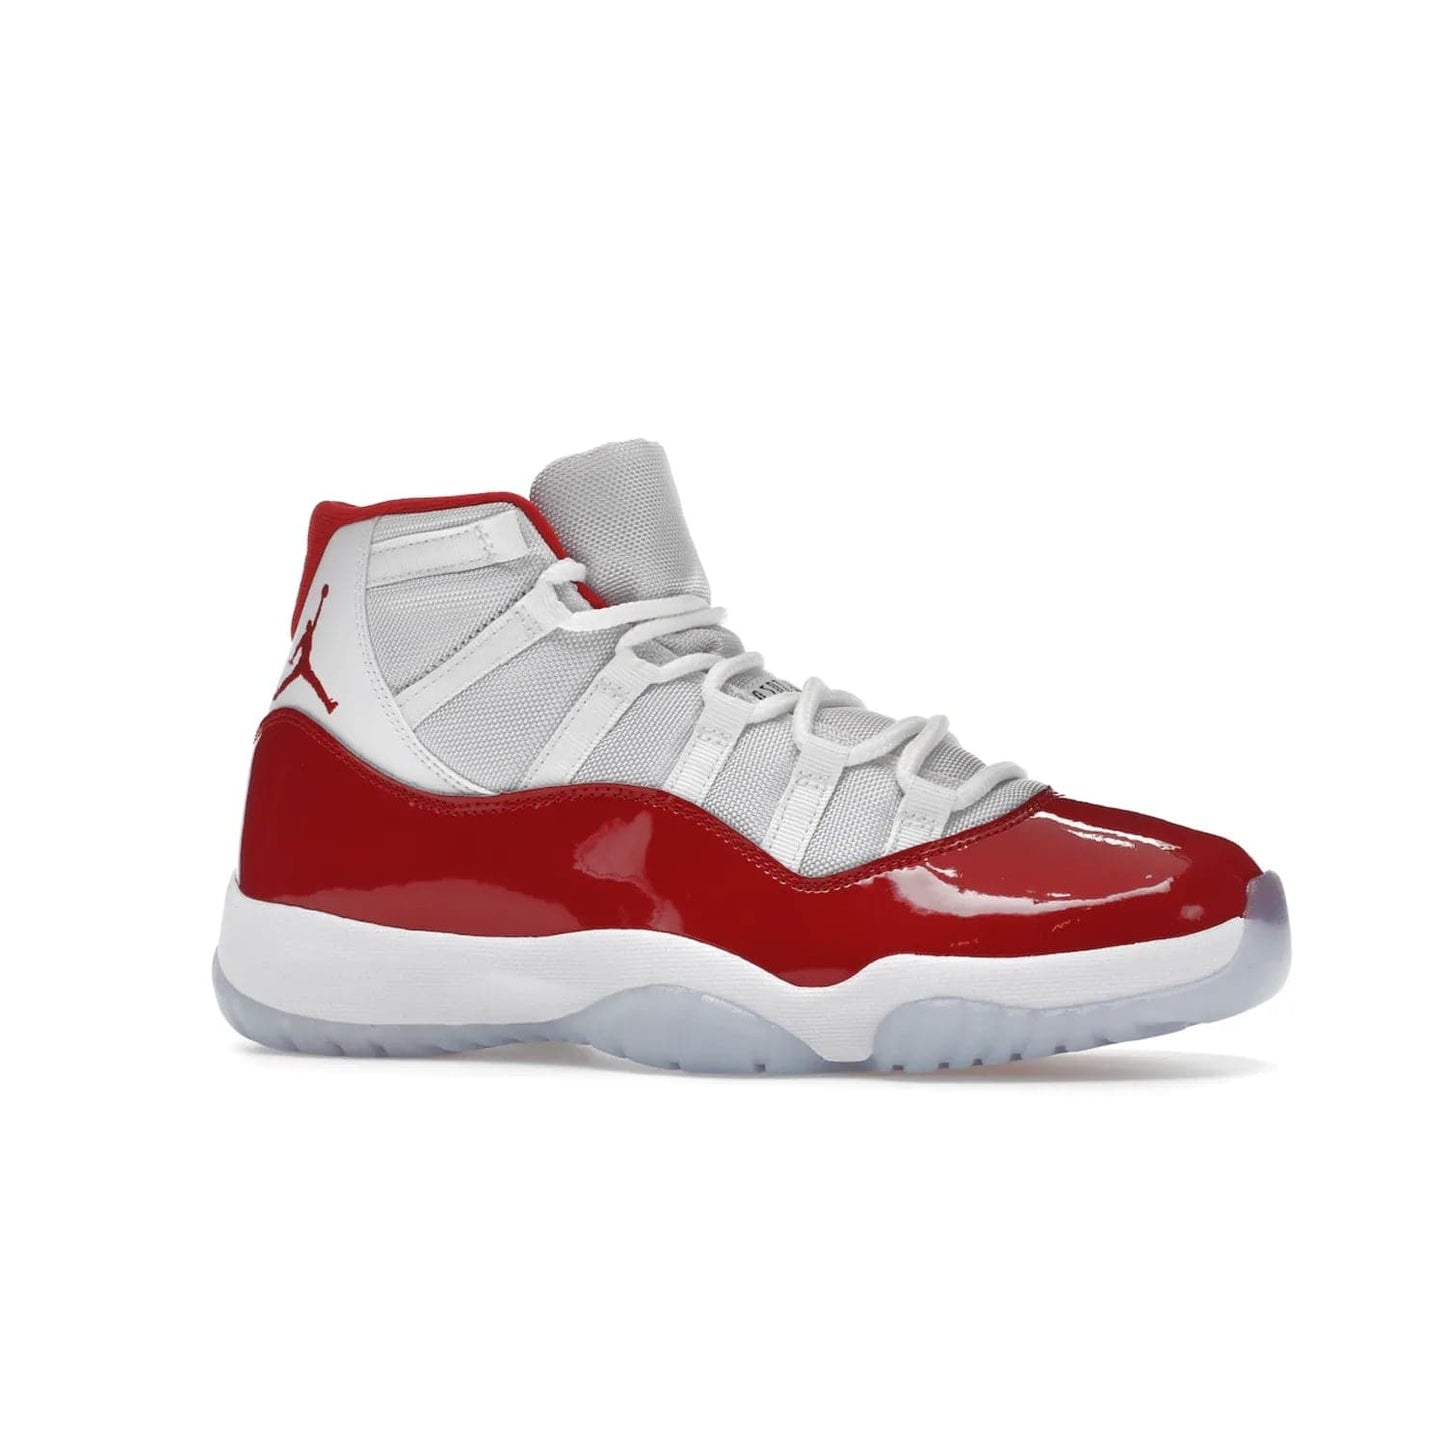 Jordan 11 Retro Cherry (2022) - Image 3 - Only at www.BallersClubKickz.com - The Air Jordan 11 Cherry features classic patent leather with Cherry red accents, icy blue outsole, and debossed 23 on the heel tab. Refresh your sneaker game with this iconic update, available December 10, 2022.